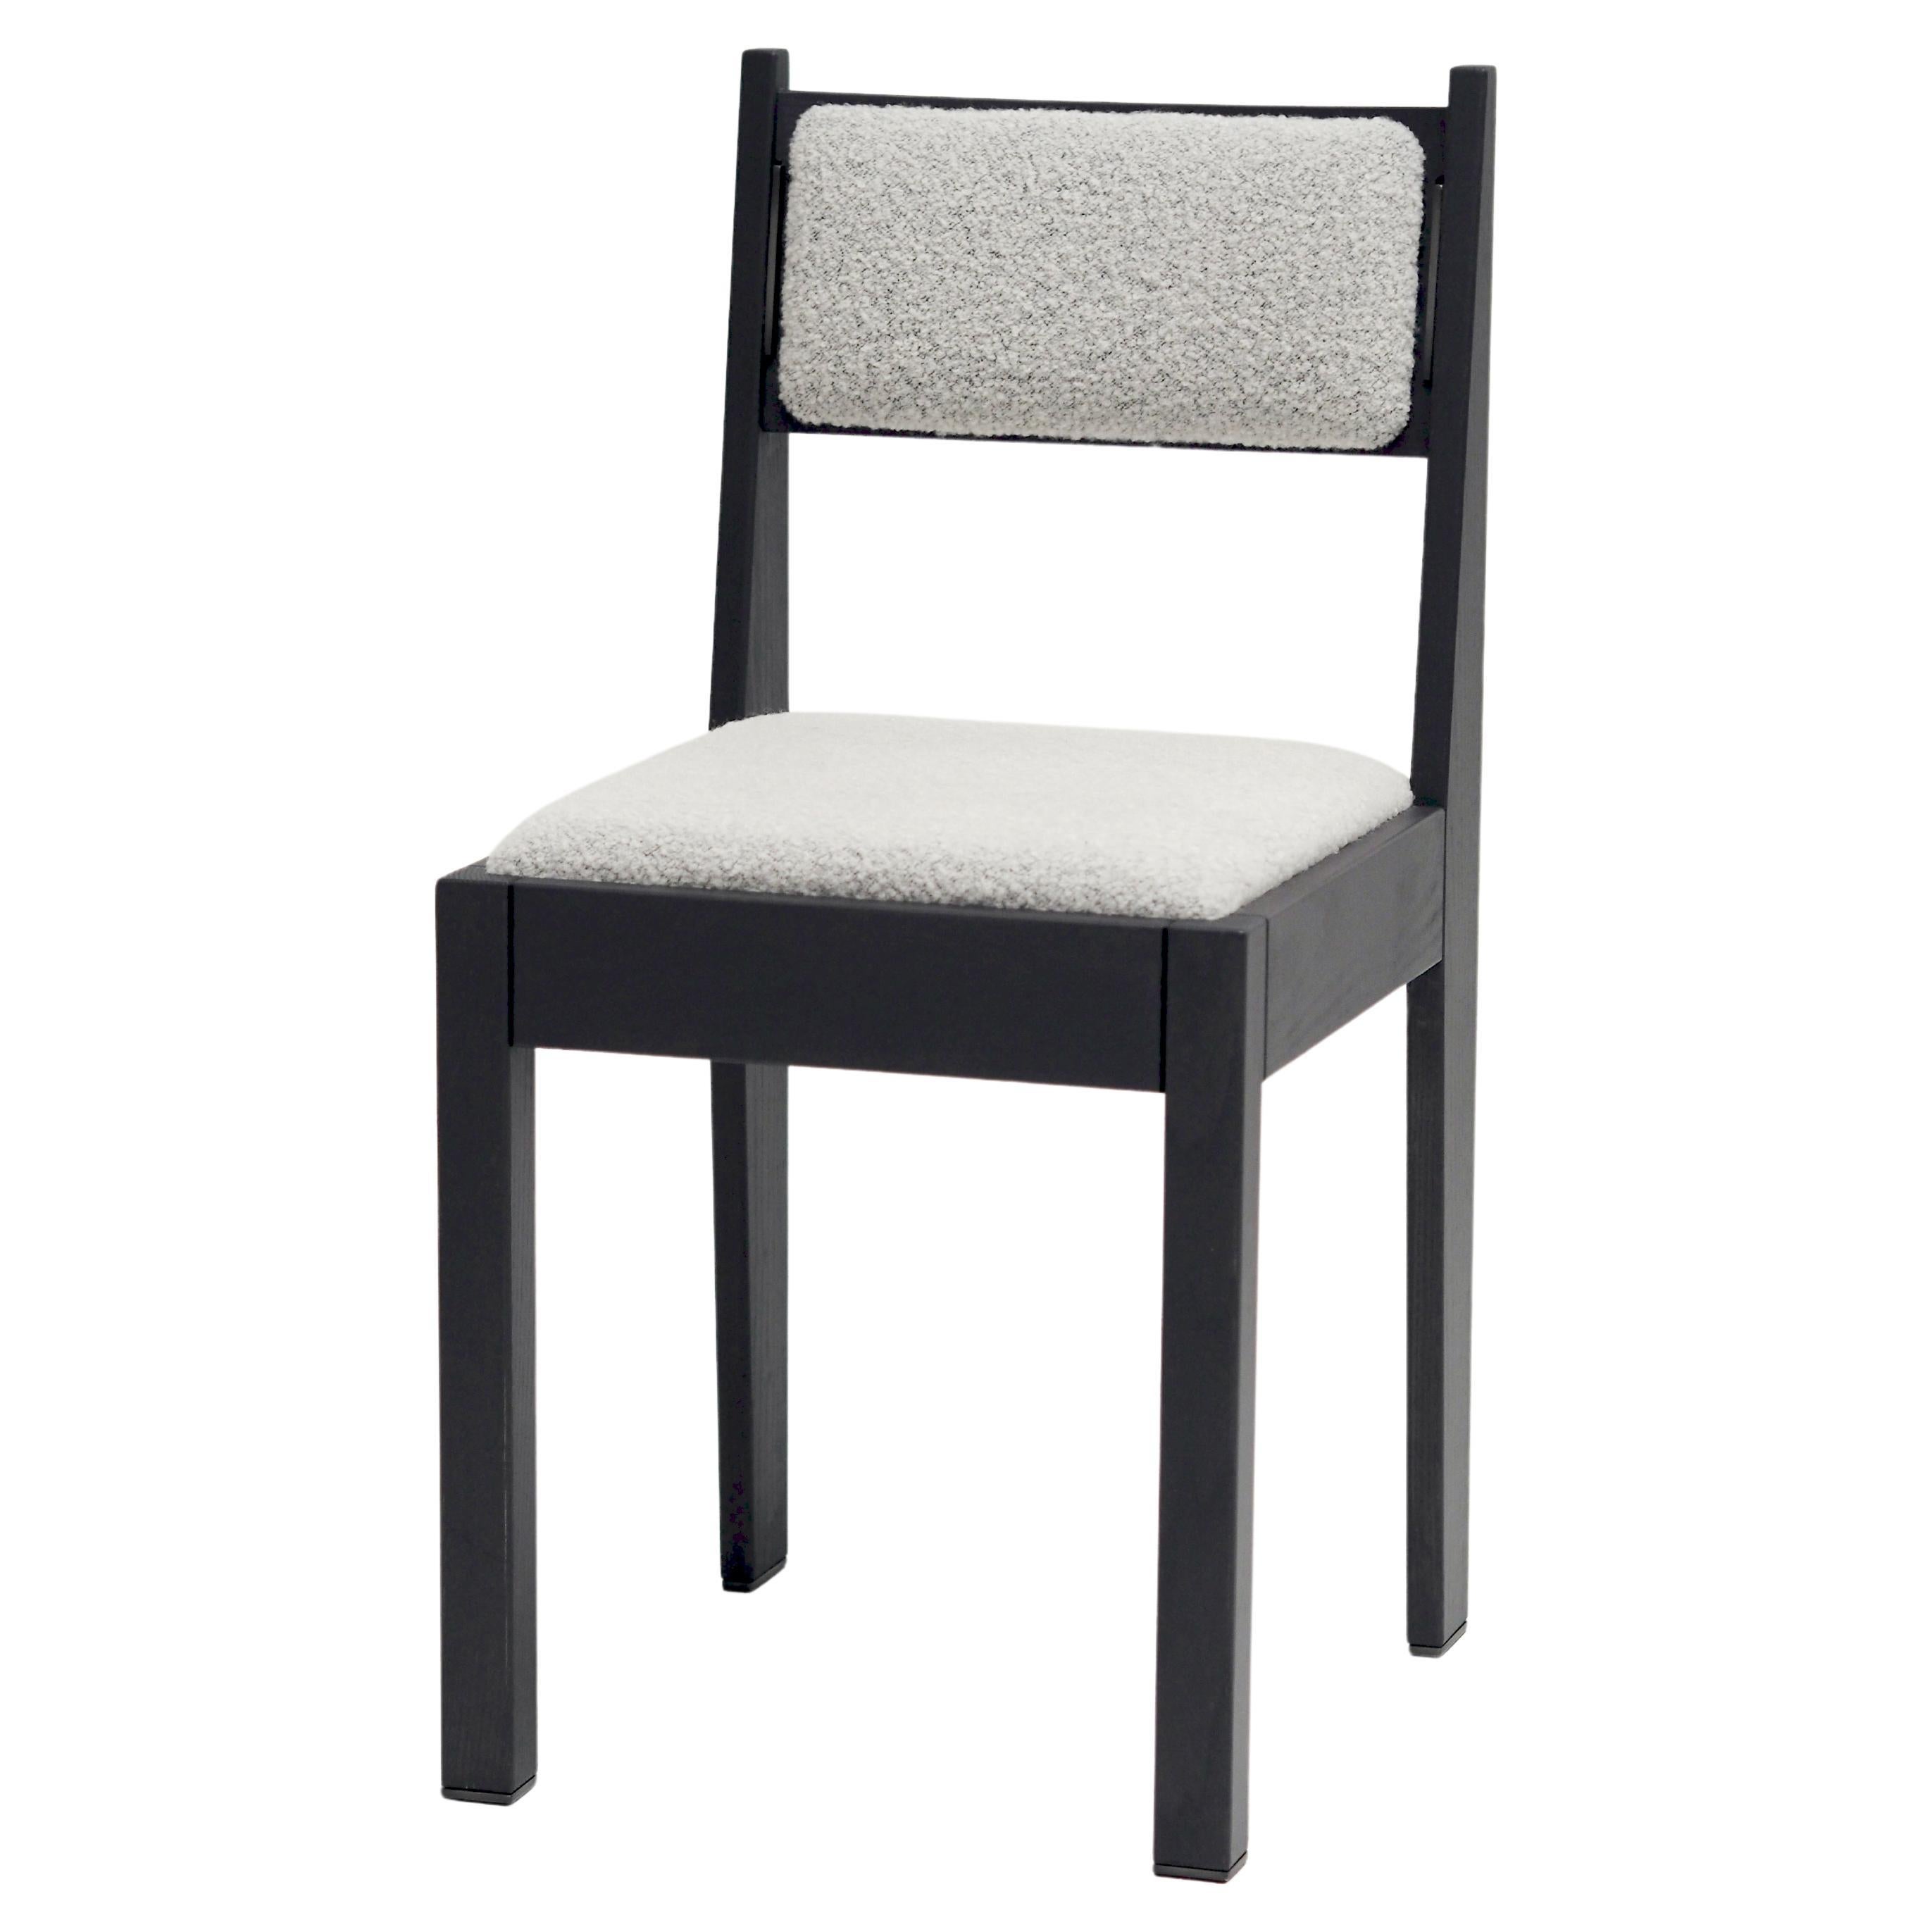 Contemporary Art Deco Chair, Black Ash Wood, White Upholstery & Bronze Details